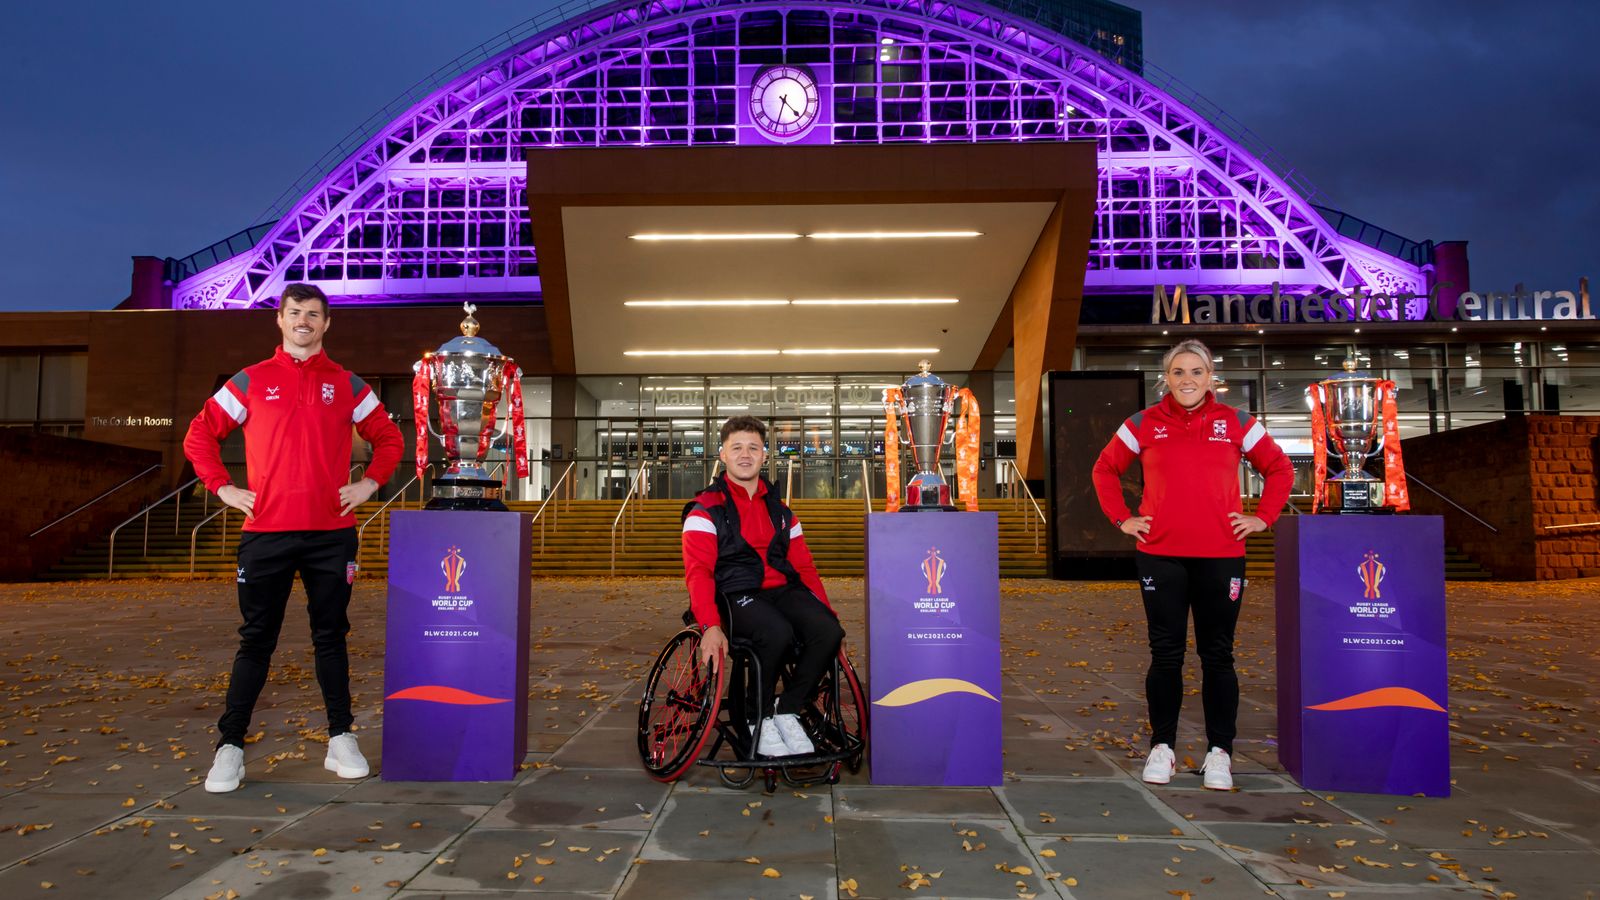 rugby-league-world-cup-2021-fixtures-kick-off-times-and-venues-for-the-men-s-women-s-and-wheelchair-tournaments-in-england